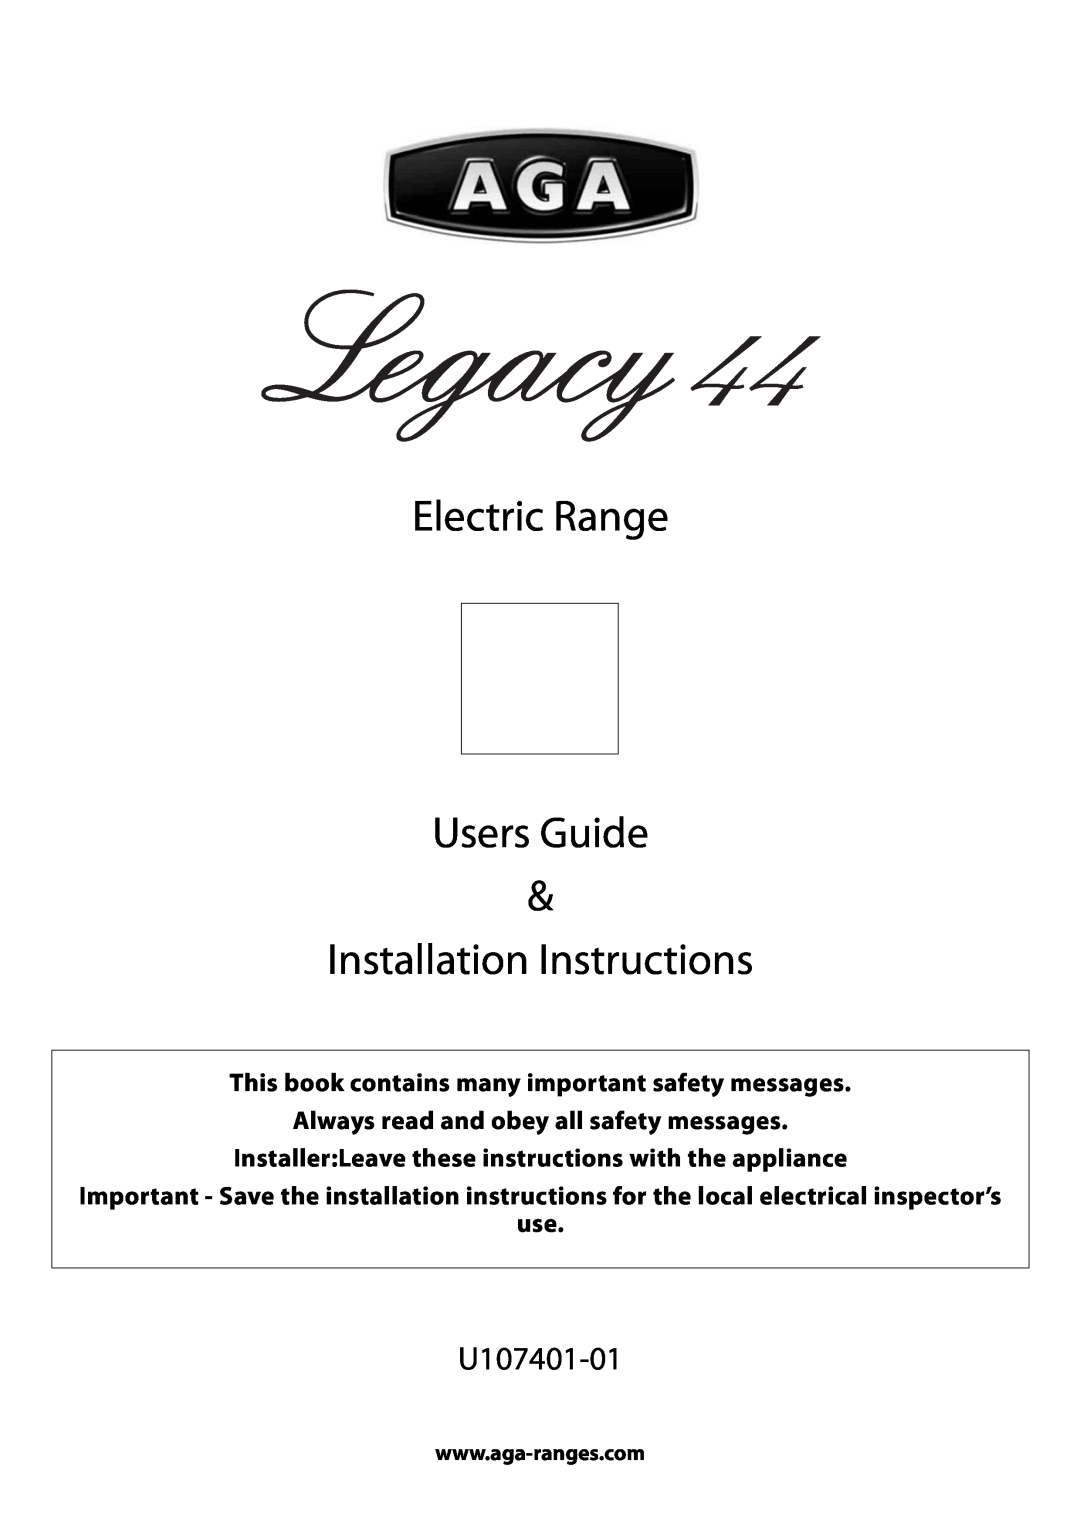 Aga Ranges Legacy 44 installation instructions U107401-01, This book contains many important safety messages 